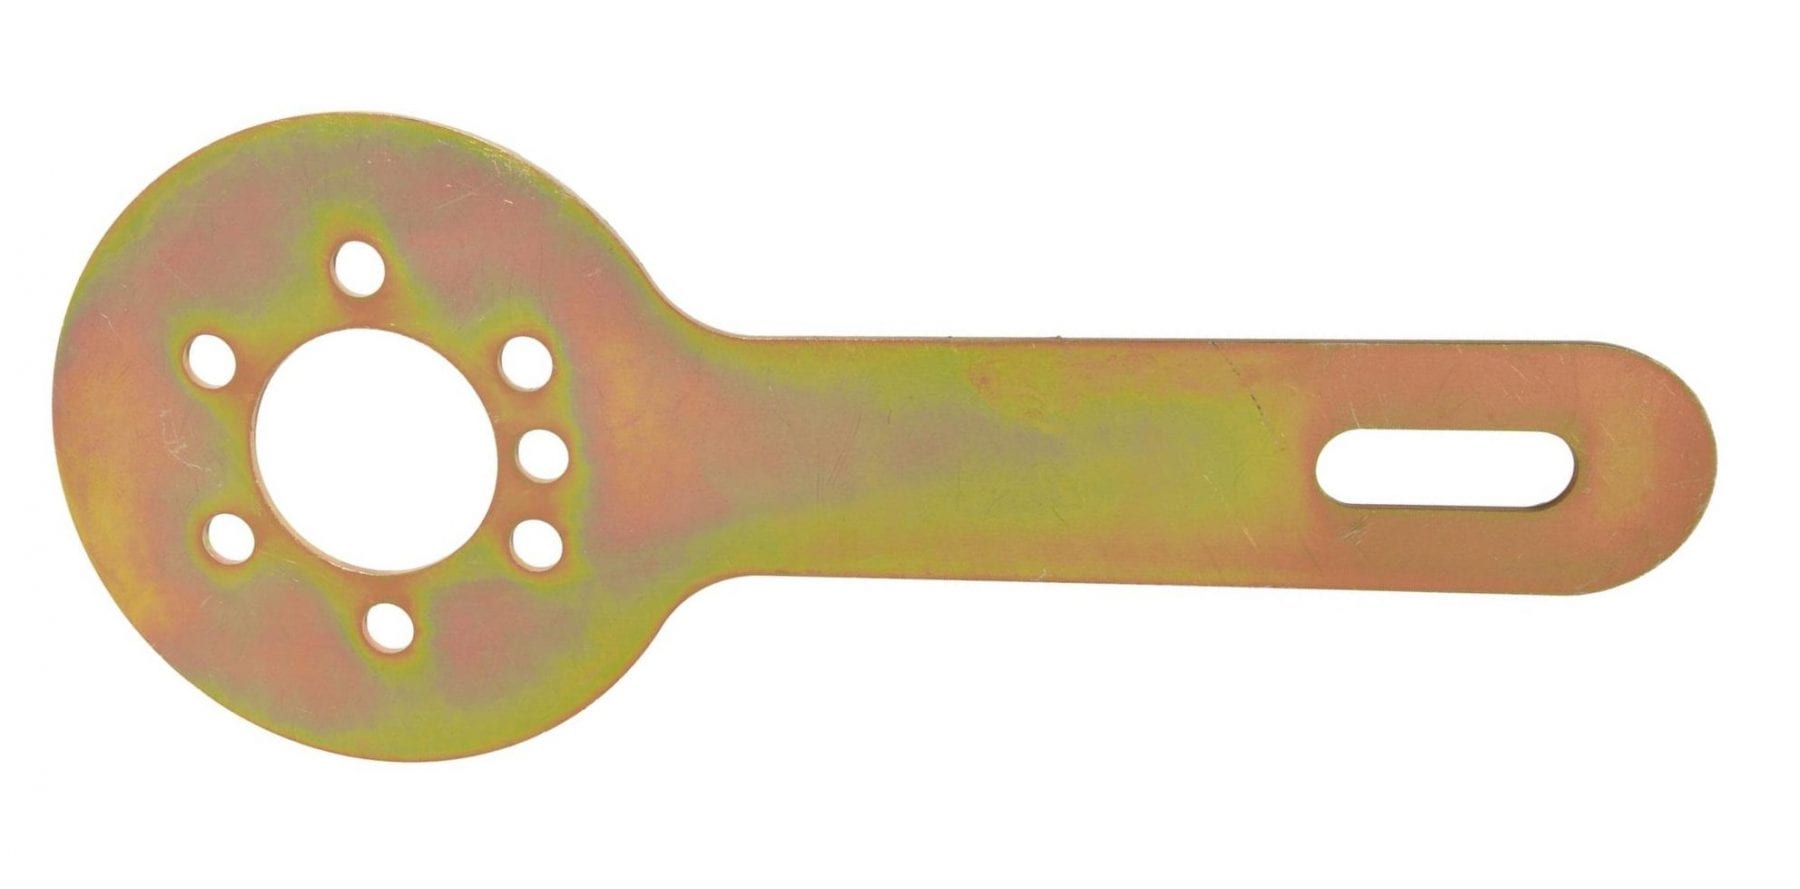 Image of  LS Engine Crankshaft Retention Holding Tool for the Performance You Need.